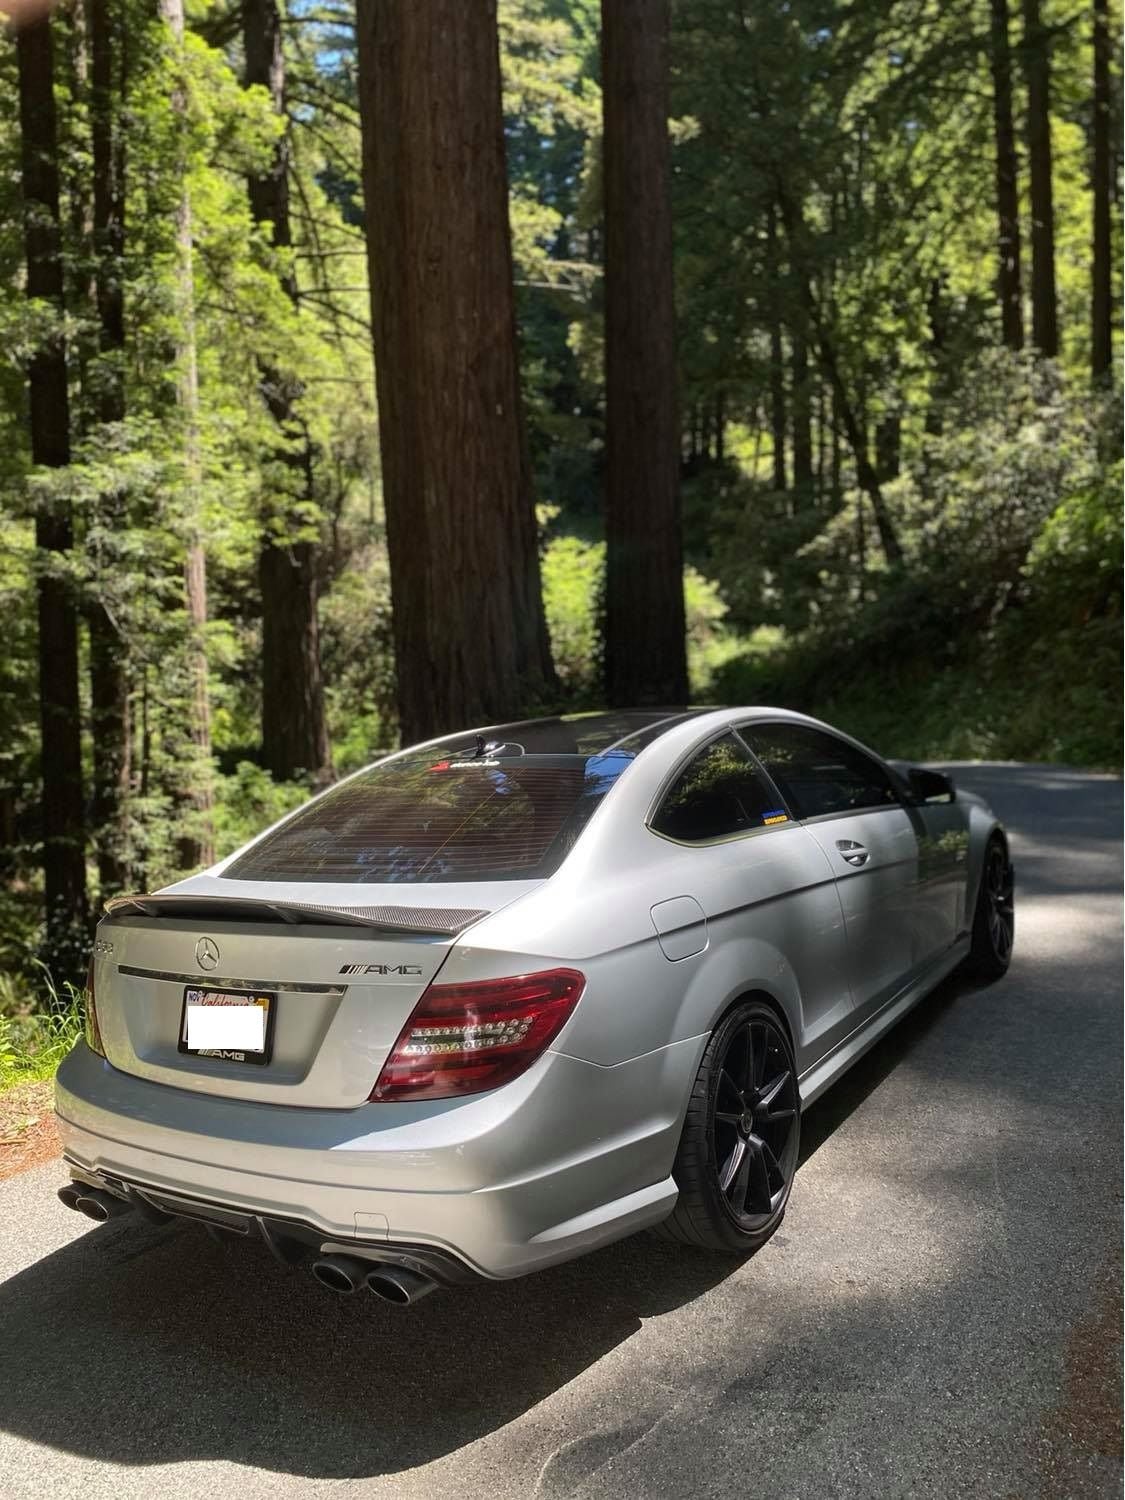 2015 Mercedes-Benz C63 AMG - FOR SALE 2015 Mercedes C63 AMG Coupe Iridium Silver **LOW MILES** - Used - VIN WDDGJ7HB9FG368547 - 20,528 Miles - 8 cyl - 2WD - Automatic - Coupe - Silver - San Francisco, CA 94121, United States